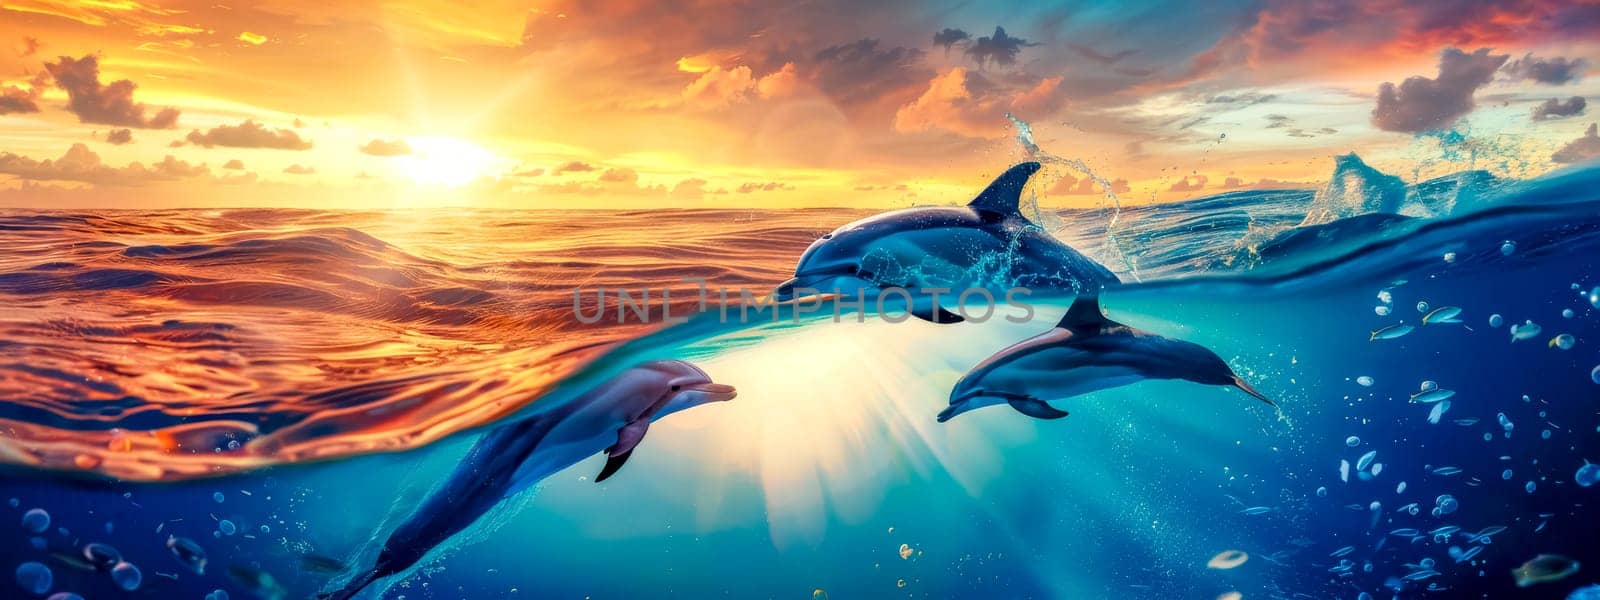 Playful dolphins jump above waves against stunning ocean sunset backdrop